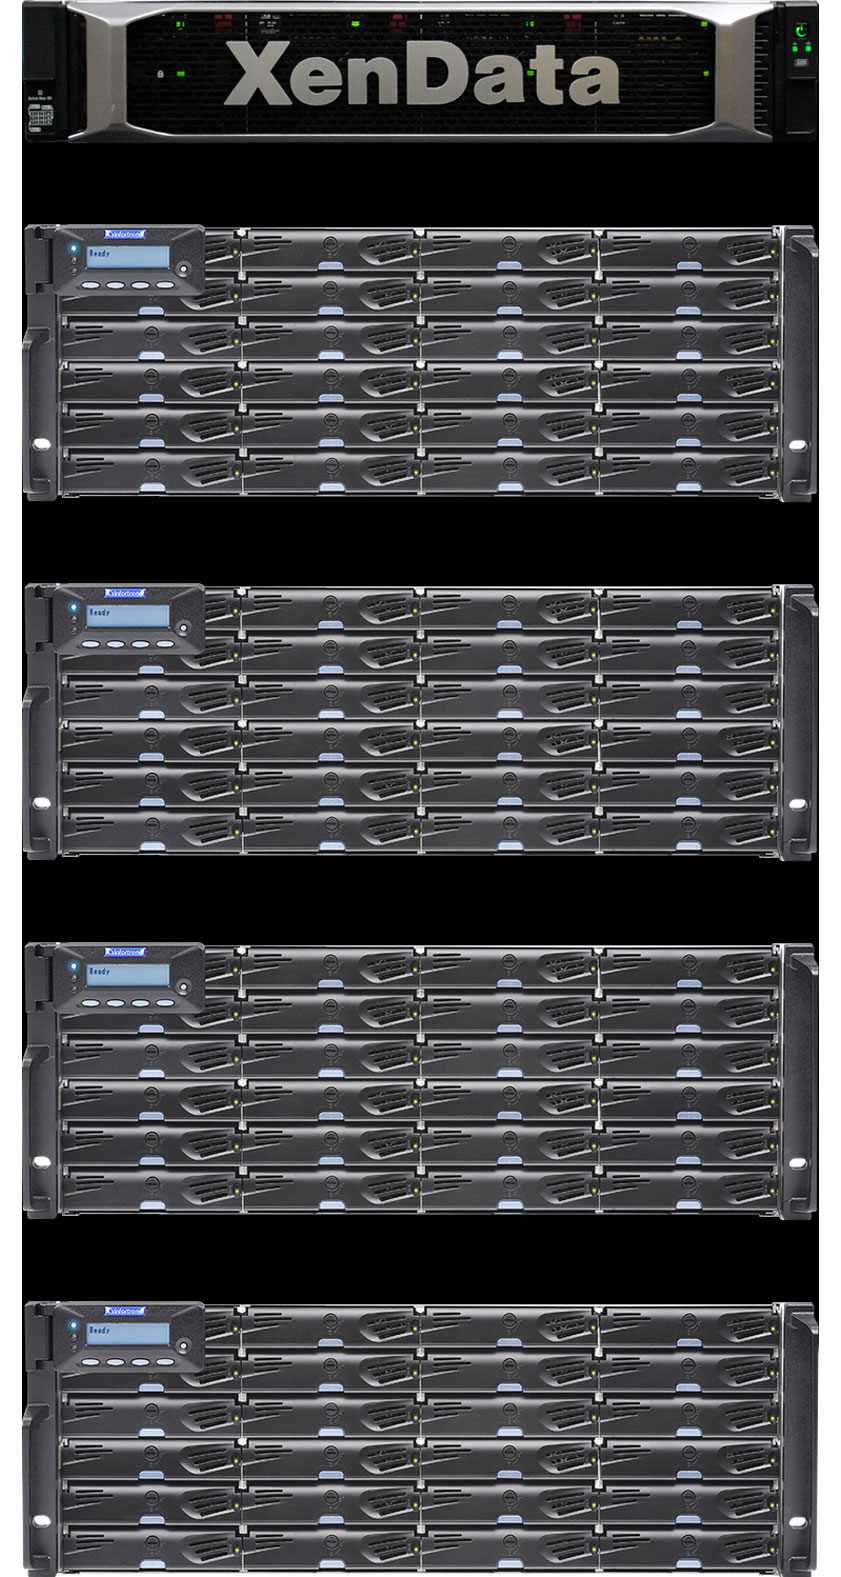 The E-Series with four 280 TB nodes prcwides a usable capacity of 1.12 PB